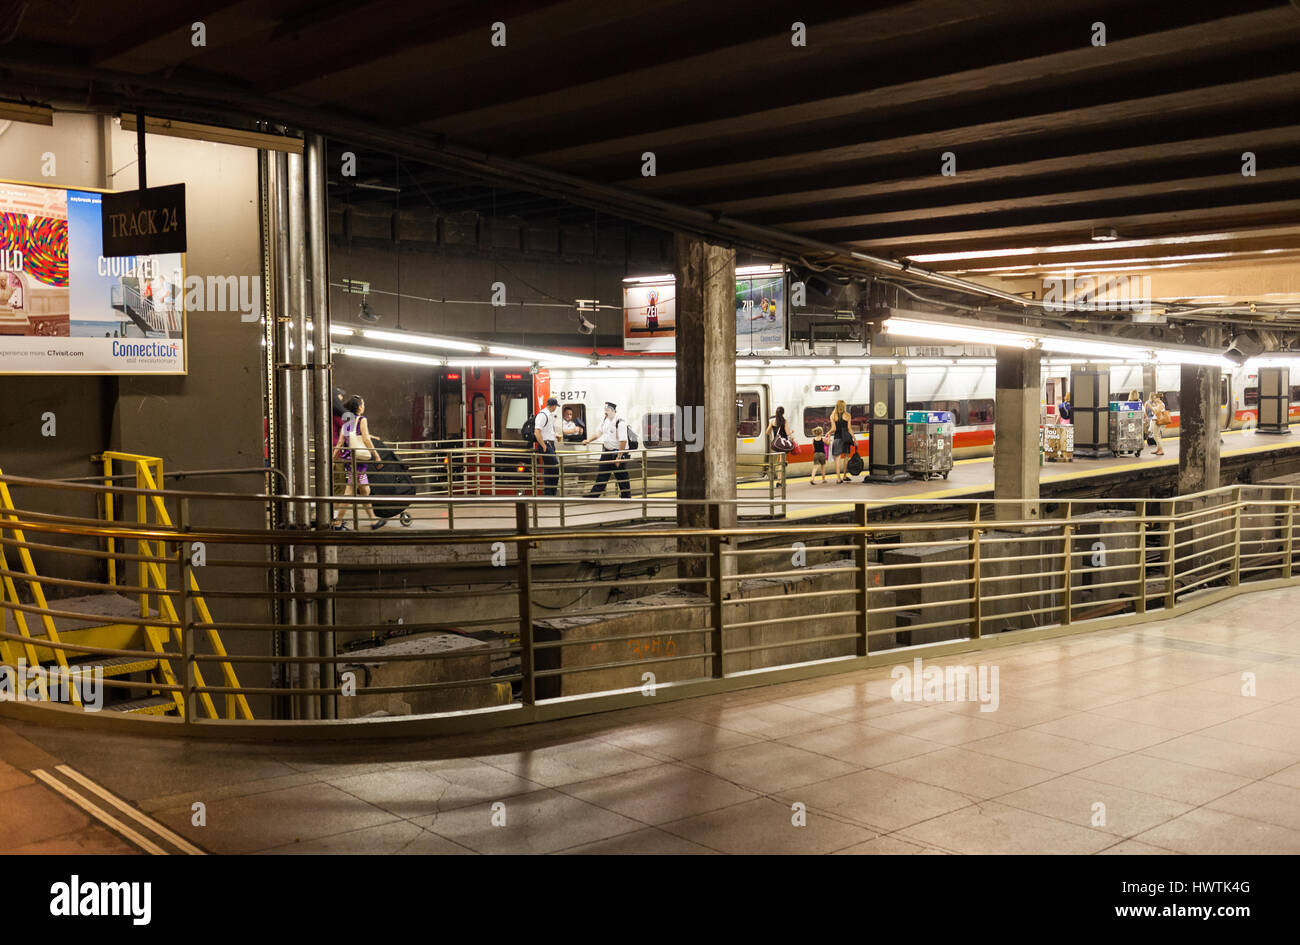 New York City, USA - July 11, 2015: Train and Subway tracks inside of Grand Central Station, Manhattan. It's the world's largest train station has bla Stock Photo